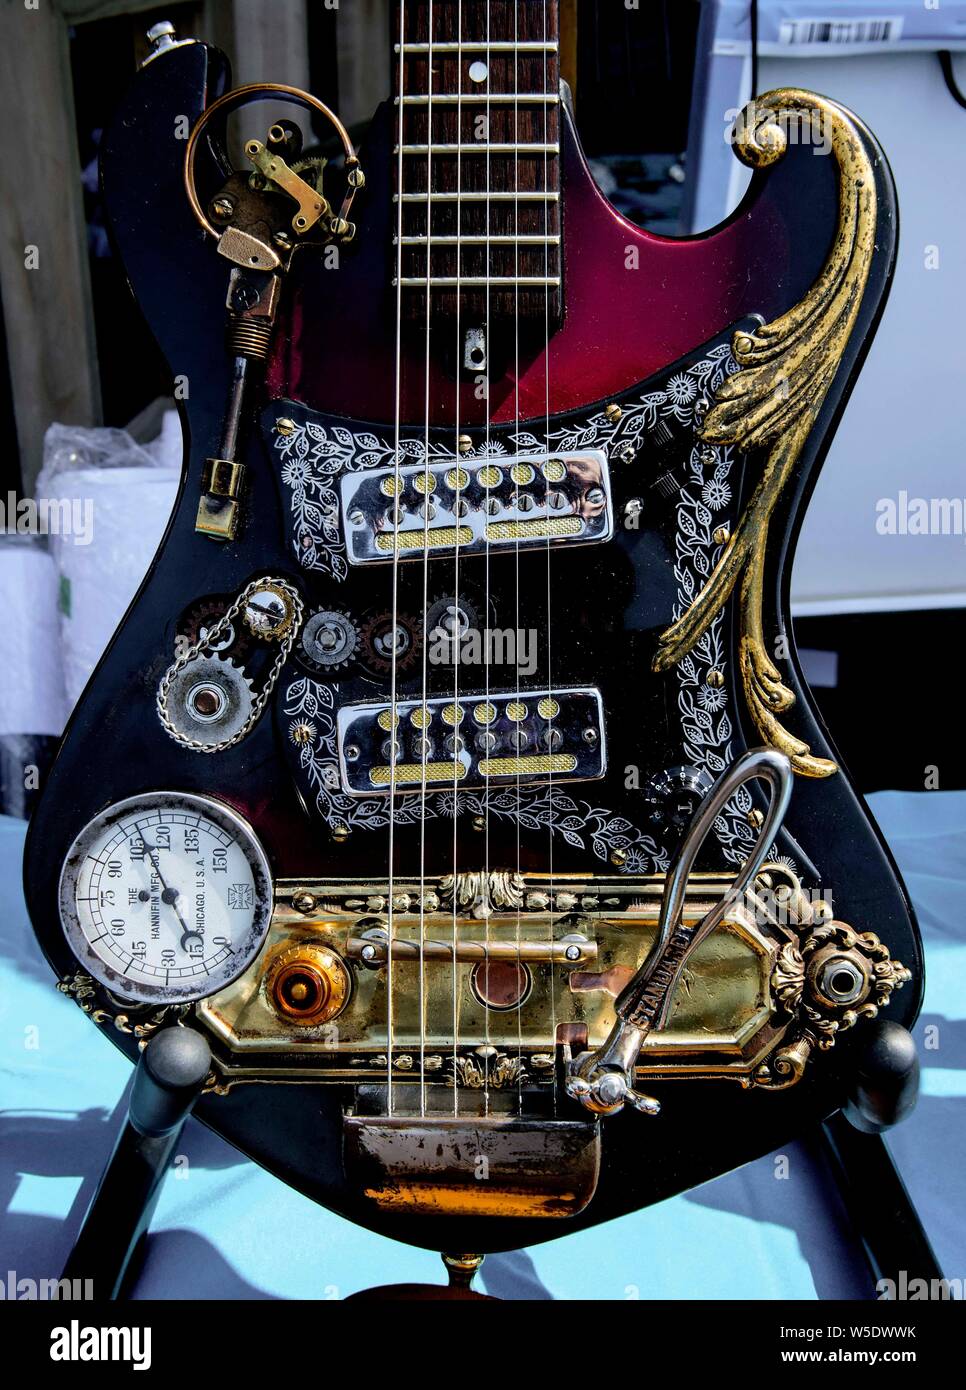 Dearborn, Michigan, USA. 28th July, 2019. Detail of a guitar by Steampunk Fabricators on display during the 10th Annual Maker Faire Detroit at the Henry Ford Museum of American Innovation. Maker Faire is a gathering of tech enthusiasts, tinkerers, engineers and science club members who gather to show and share knowledge about what they've made. Credit: Brian Cahn/ZUMA Wire/Alamy Live News Stock Photo